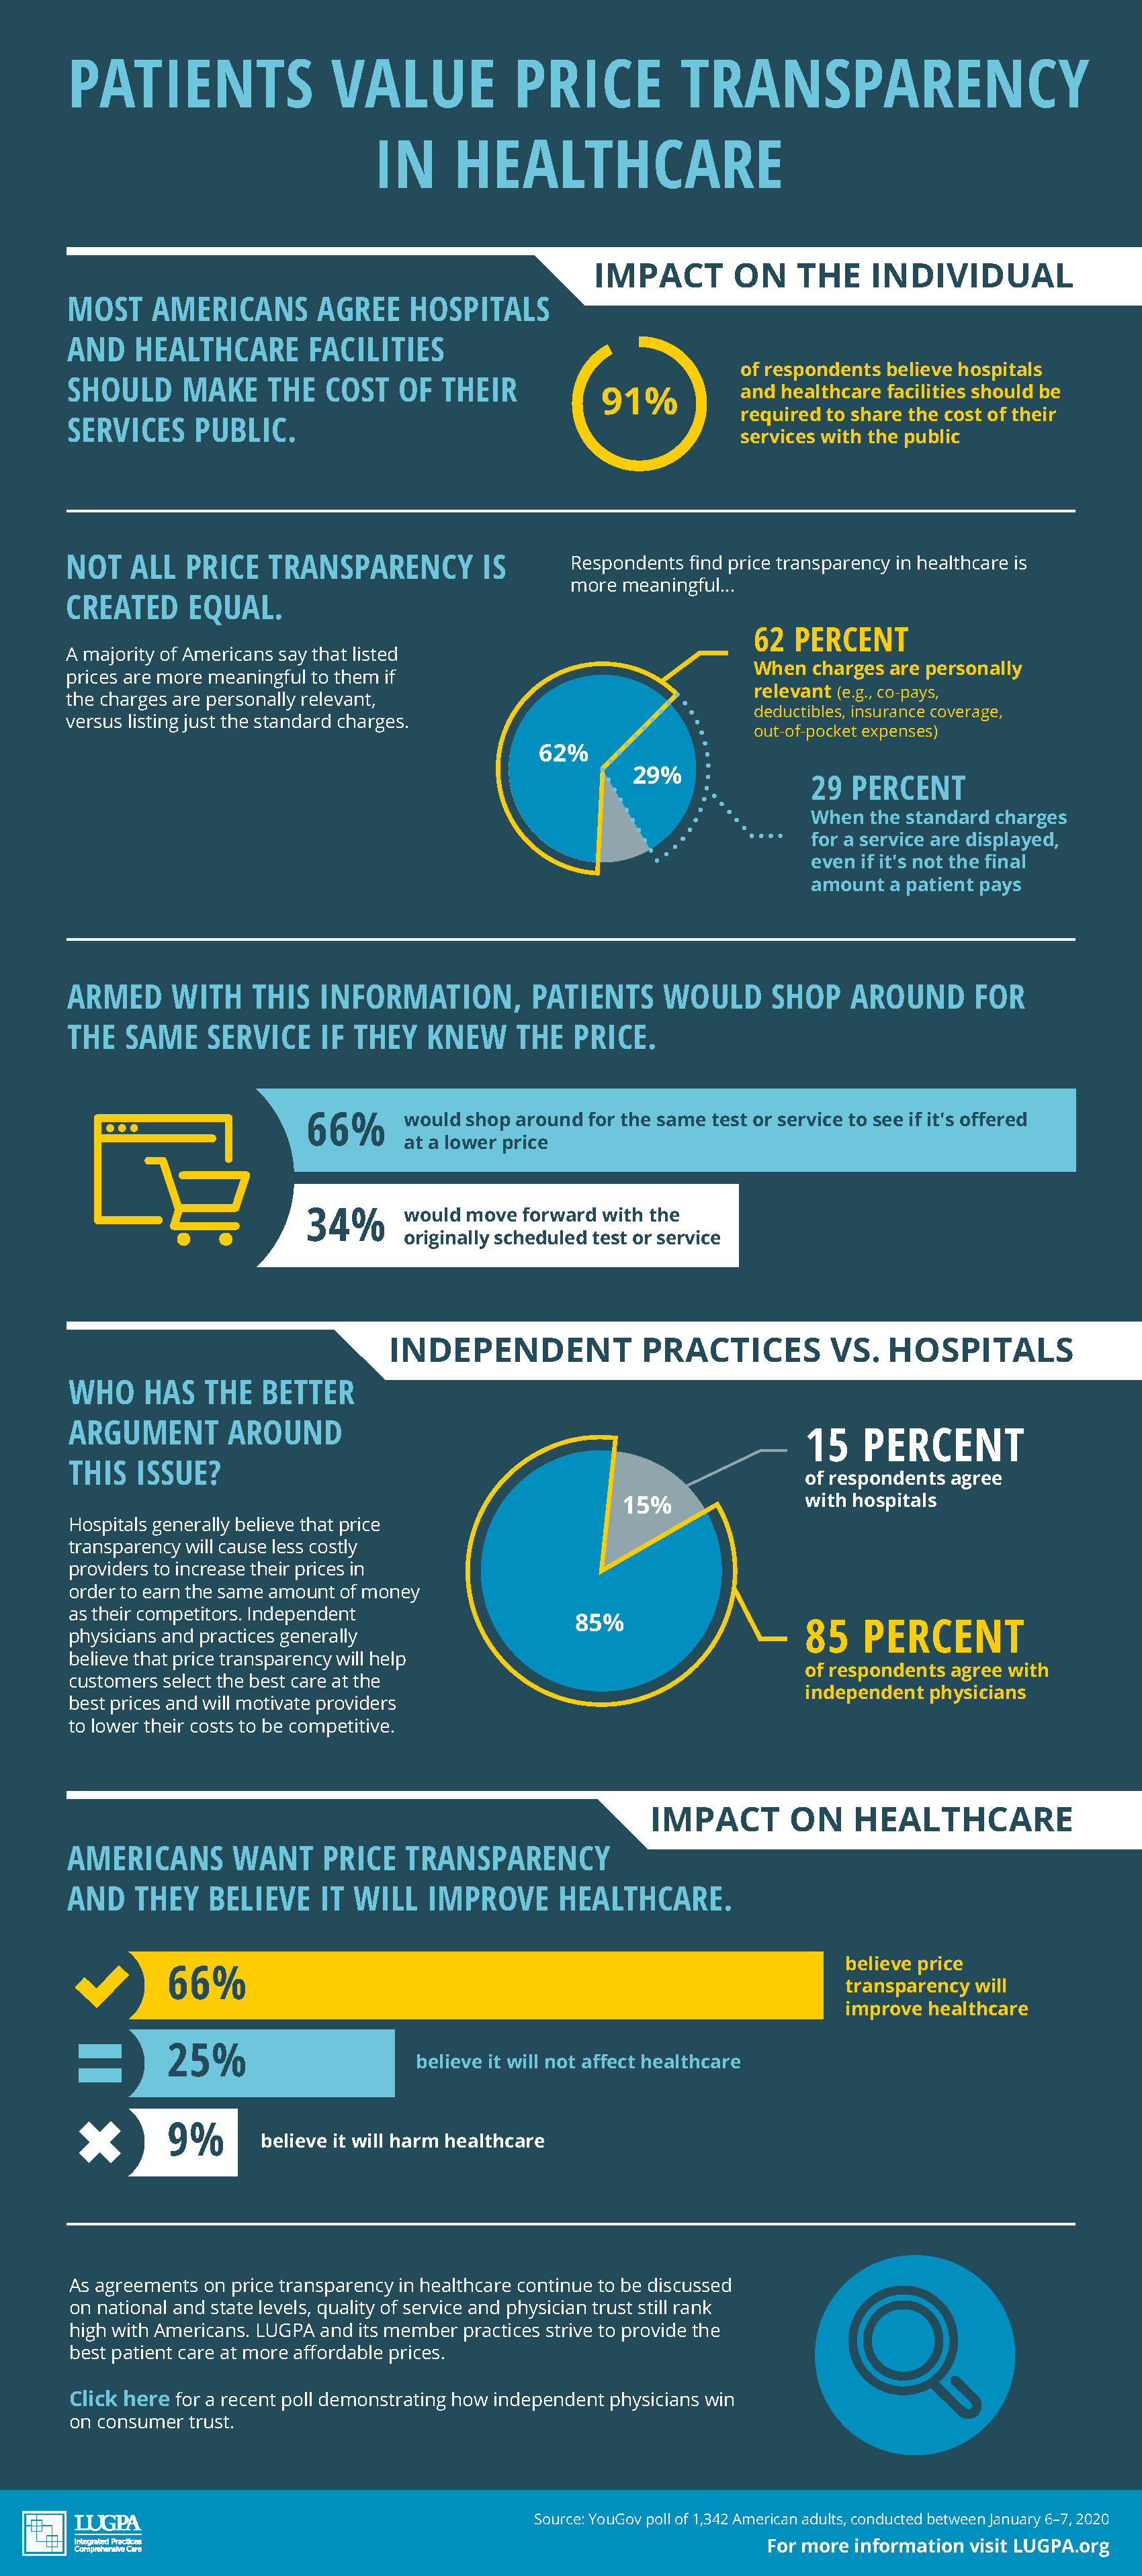 Americans Want Healthcare Price Transparency